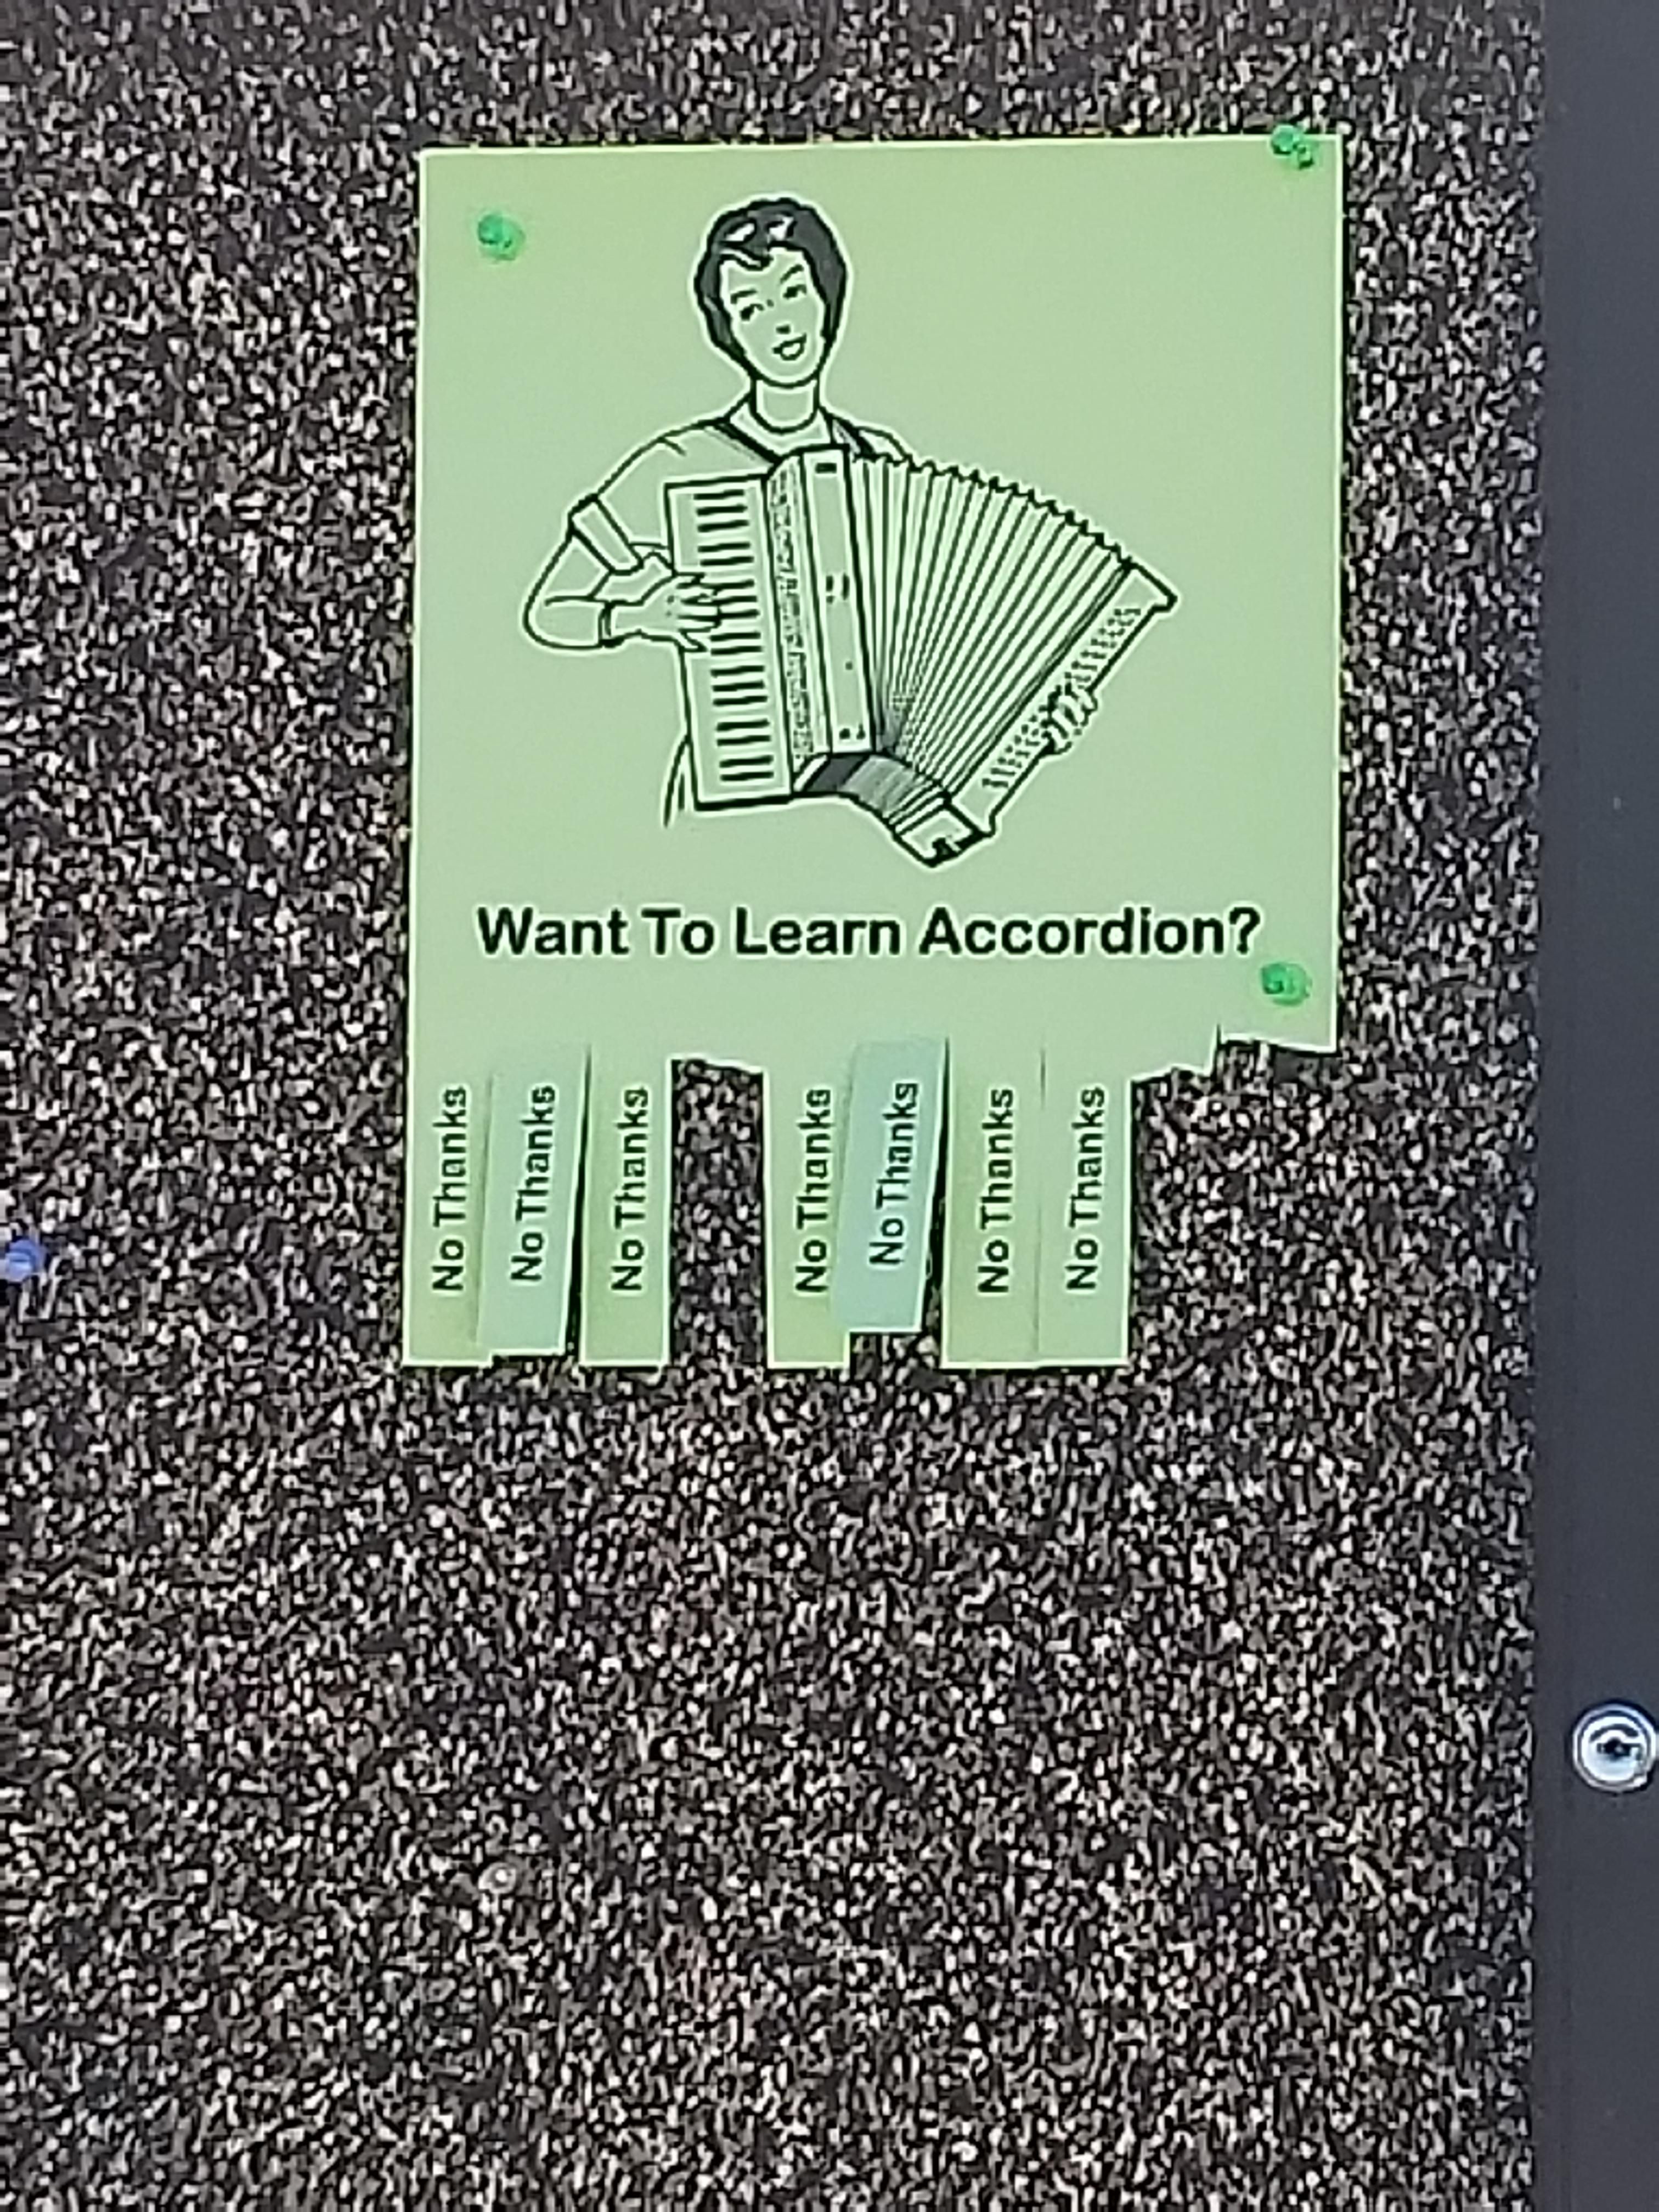 Ad for accordian lessons on my neighborhood board